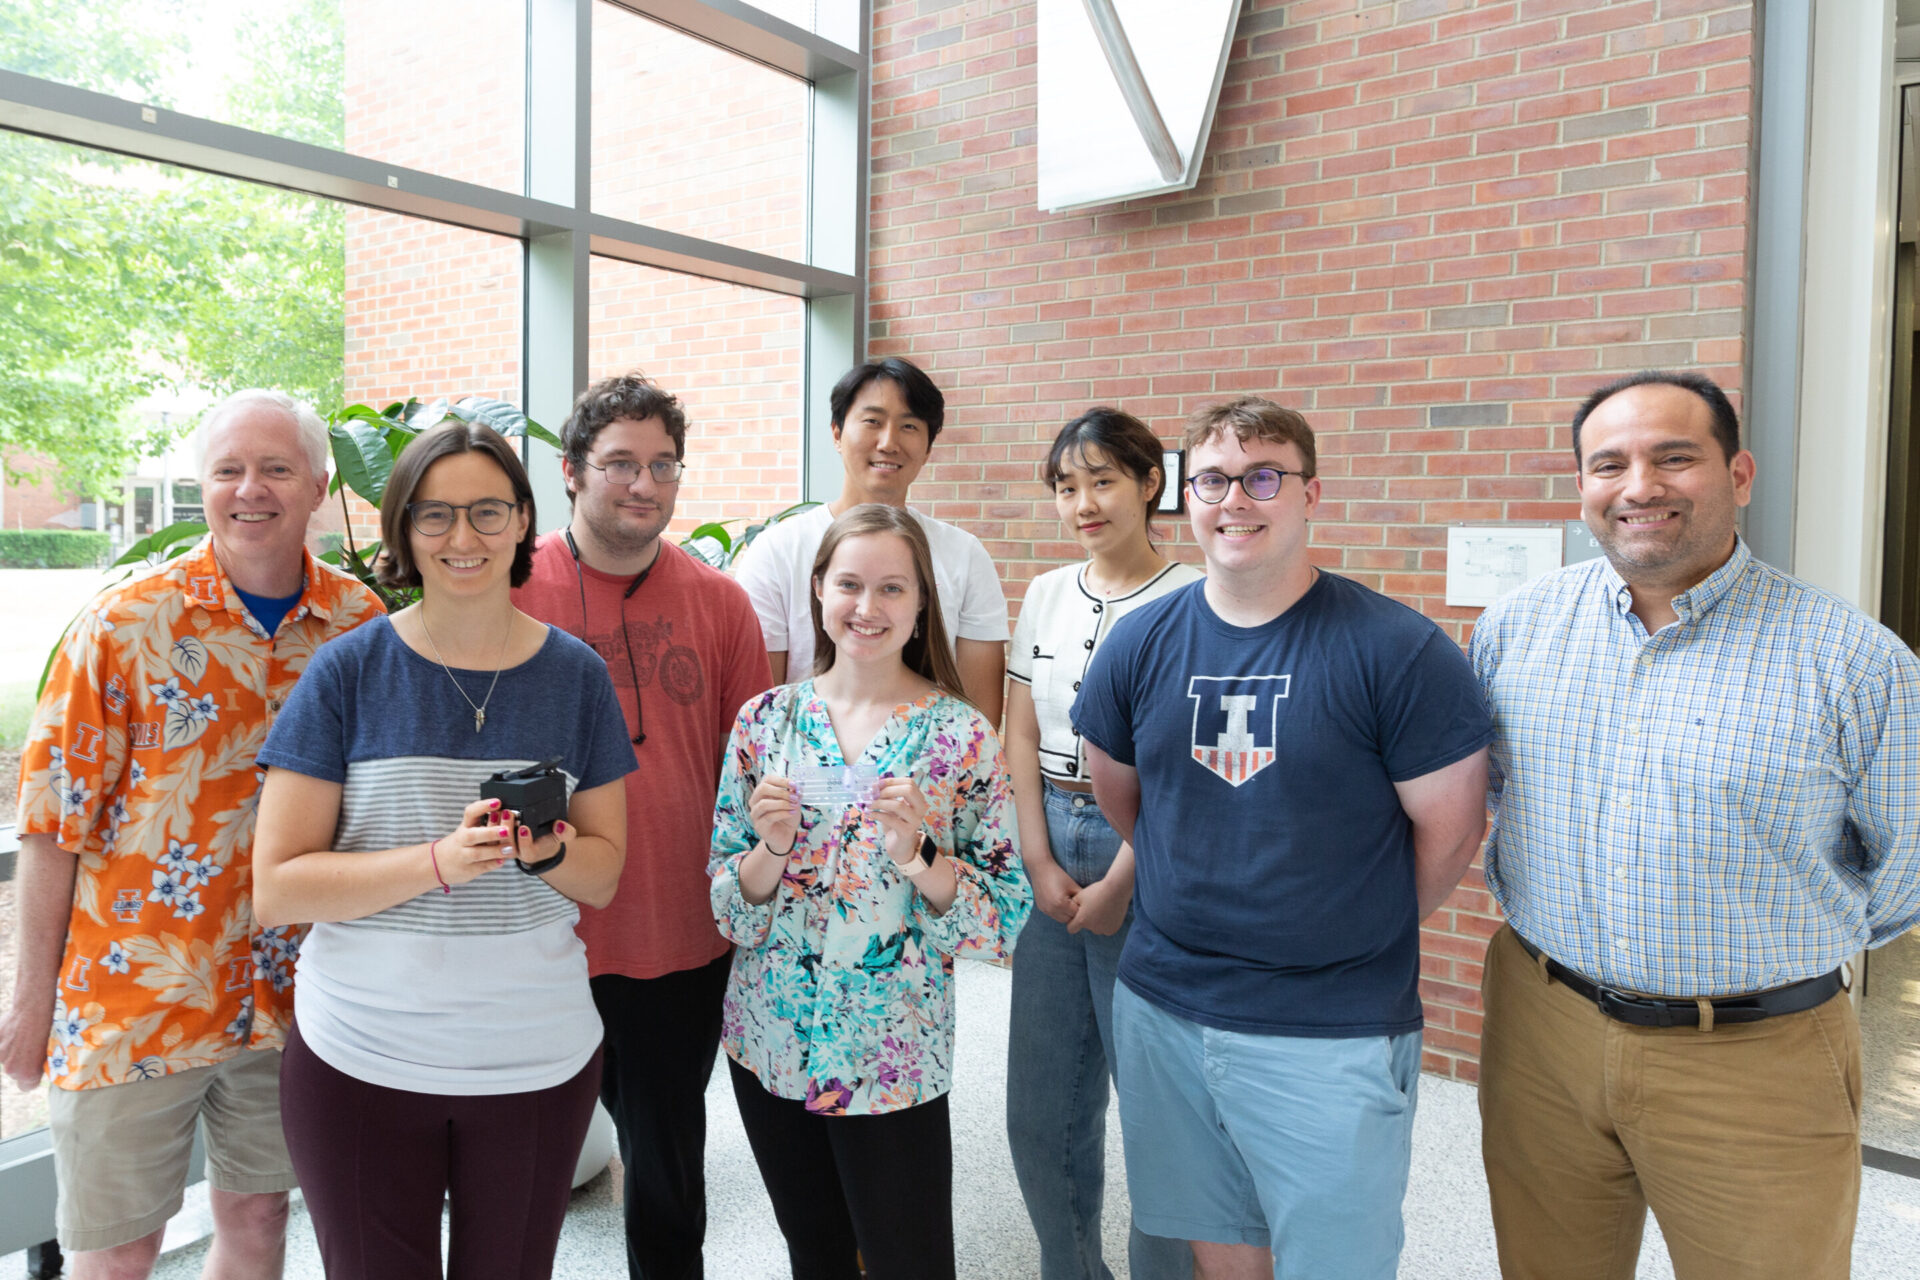 From left: Brian Cunningham, Amanda Bacon, Aaron Jankelow, Katherine Koprowski, Han Keun Lee, Weijing Wang, Robert Stavins, and Enrique Valera. Bacon and Koprowski are holding the instrument and the cartridge, respectively. CREDIT Julia Pollack